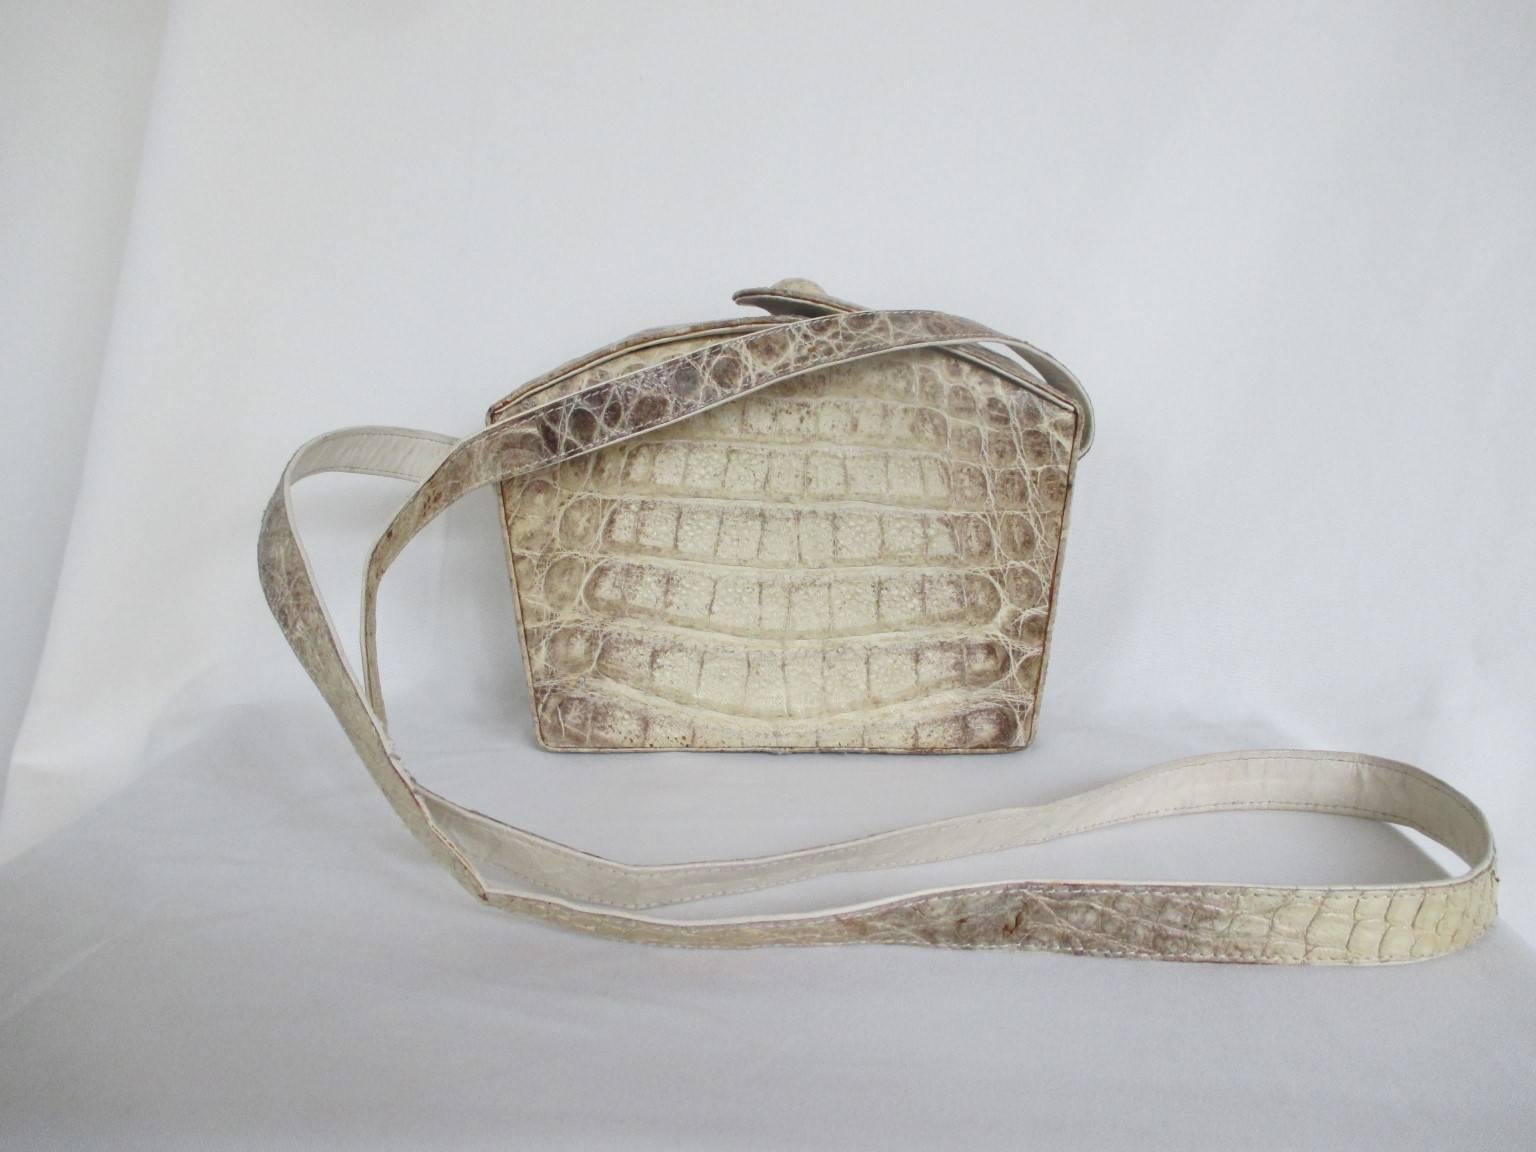 Collectors item!
This rare vintage box bag is made from Himalaya crocodile leather around the 1930/1940's in Art deco style.
Its closes with a press button in the middle.
The interior is leather with an inside zipped pocket.
It has a long handle